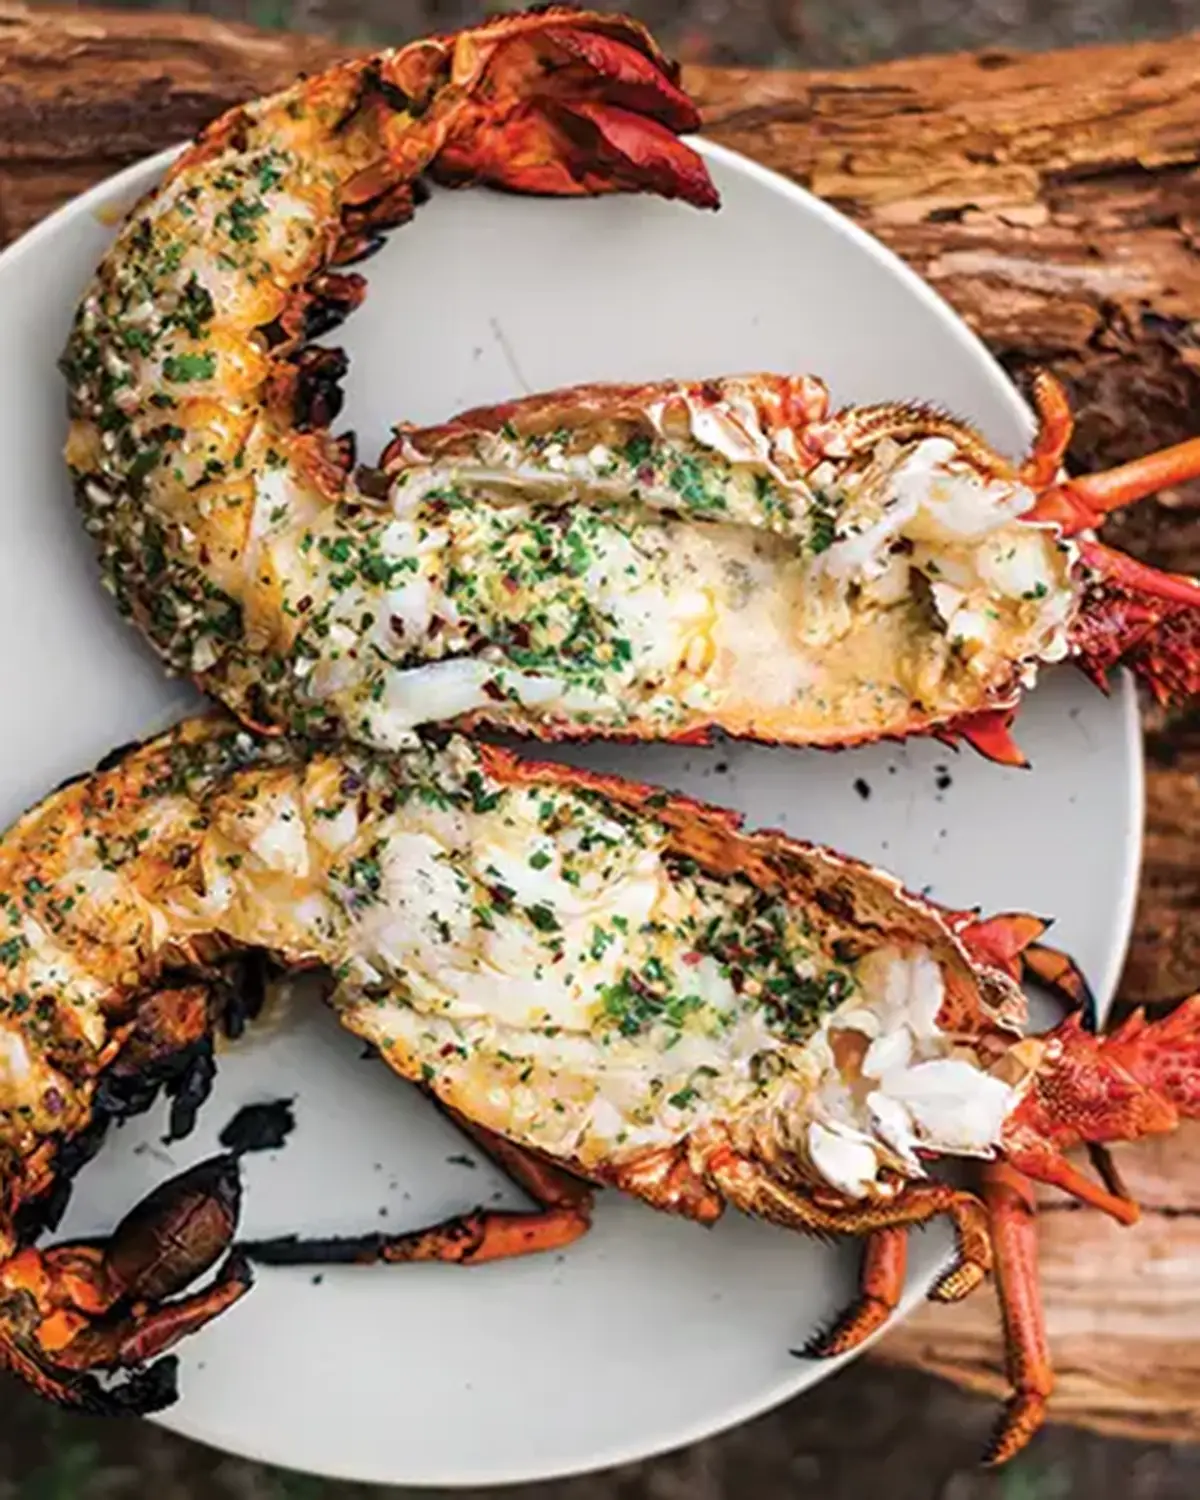 Grilled Lobster with Garlic-Parsley Butter